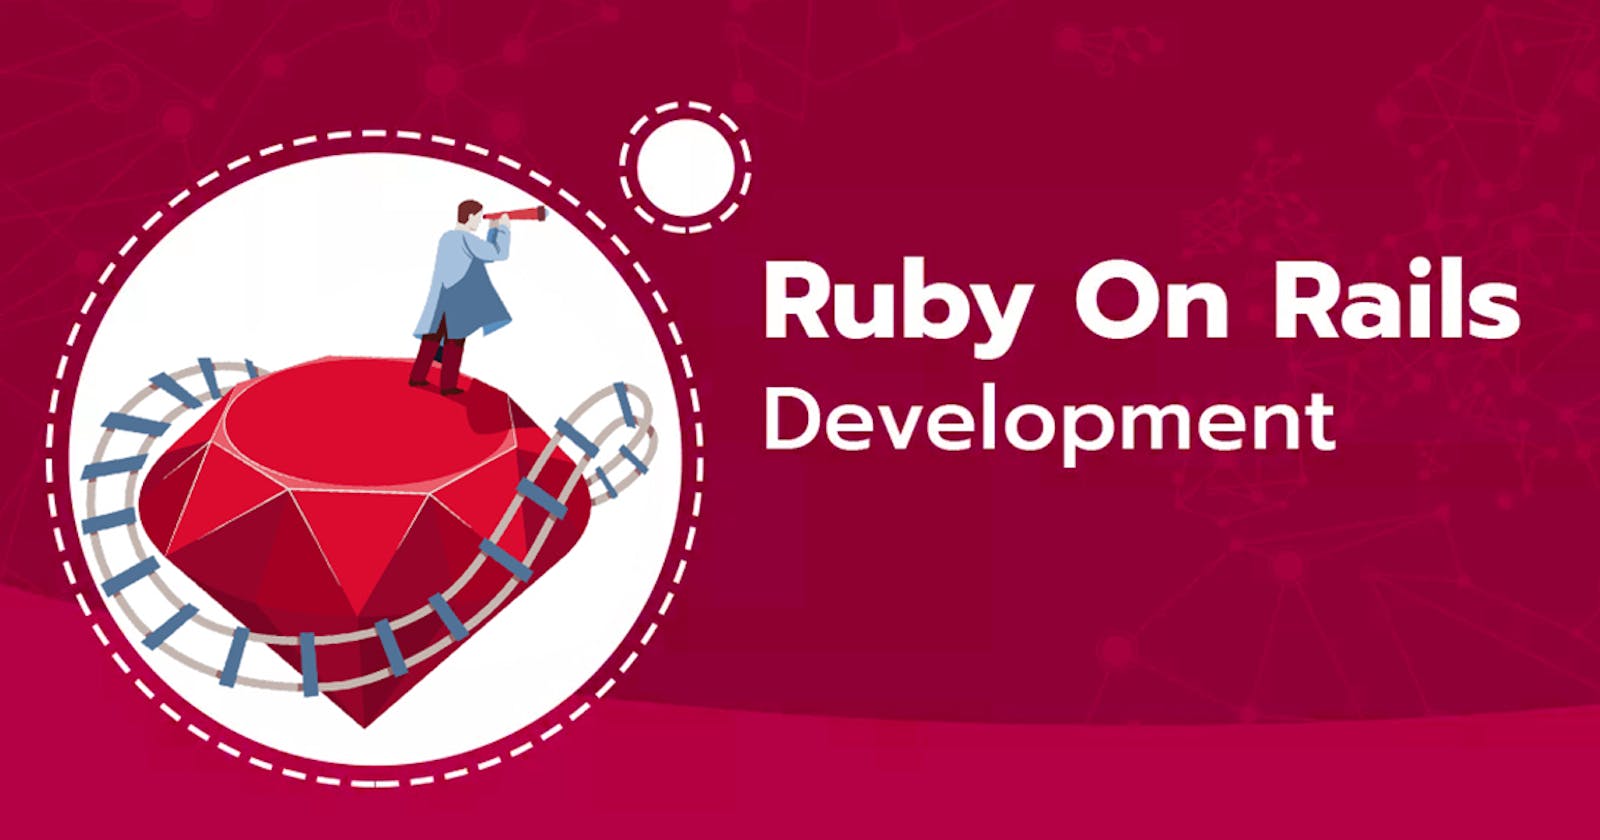 Find vetted Freelance Ruby on Rails Developer for your project without any hassle.